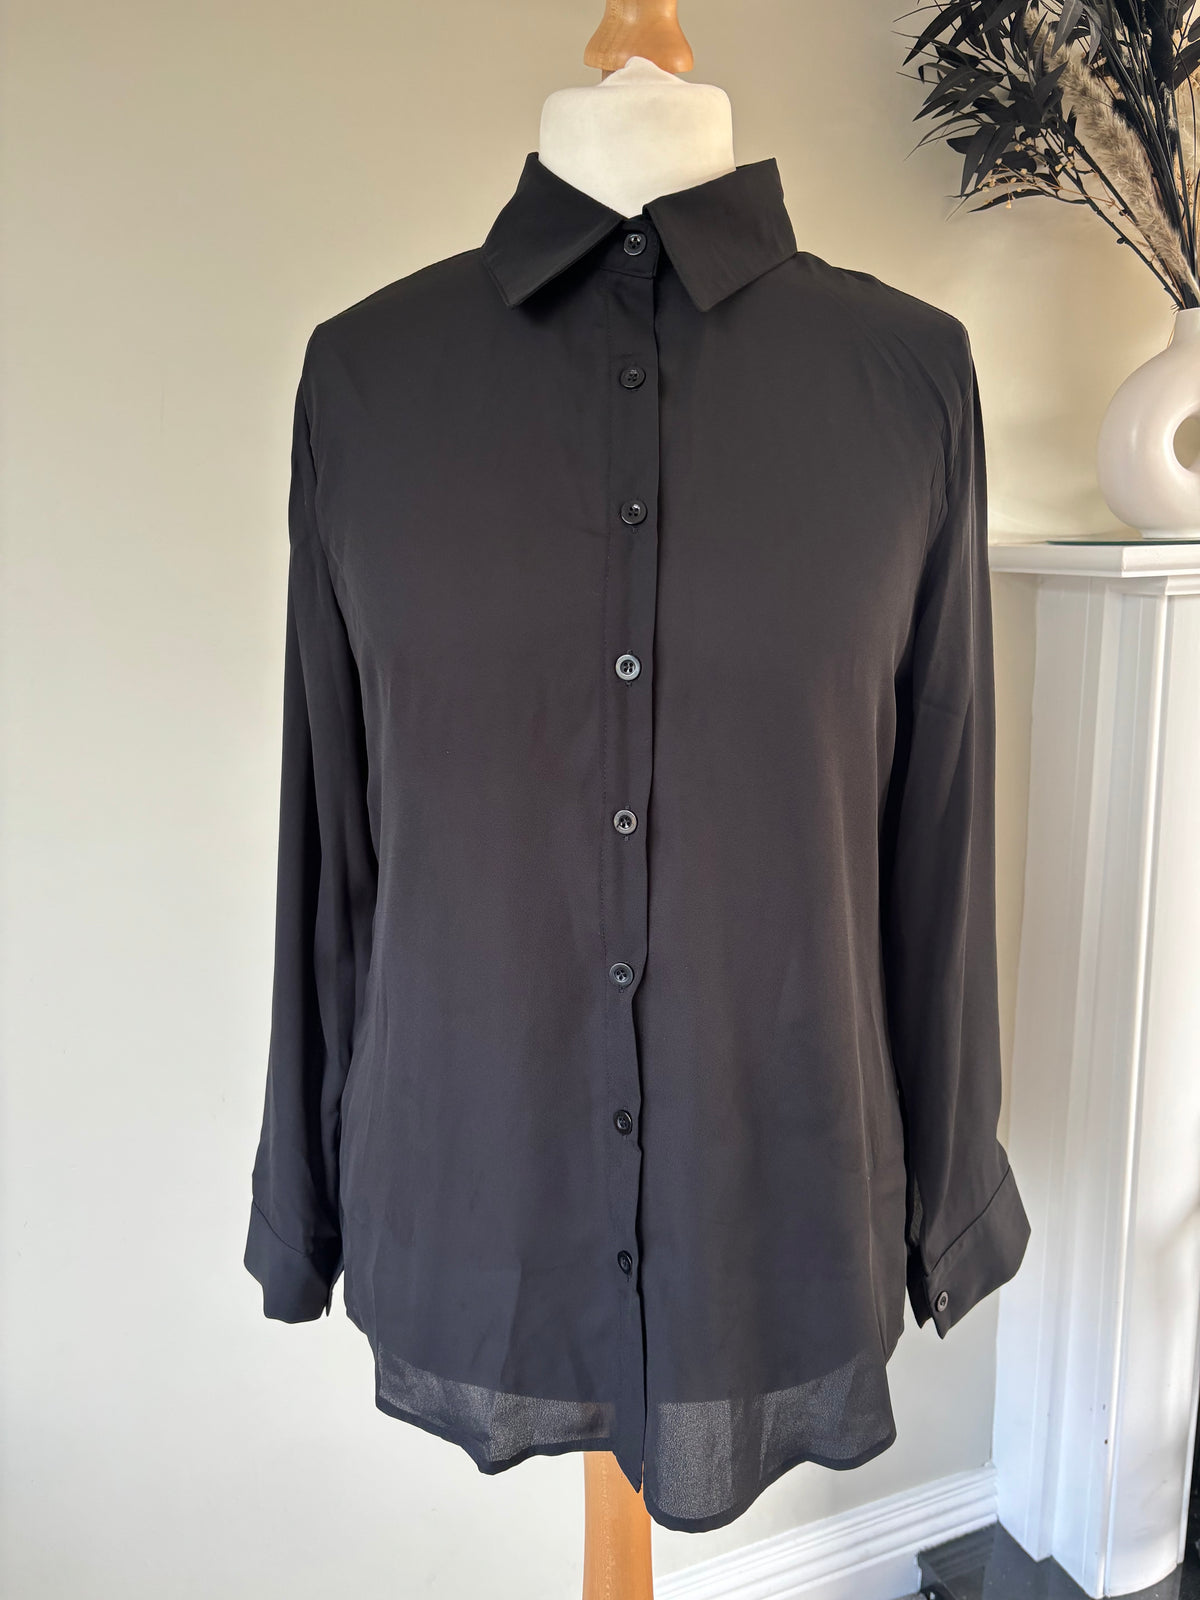 Black button shirt by Casiecy size 14/16